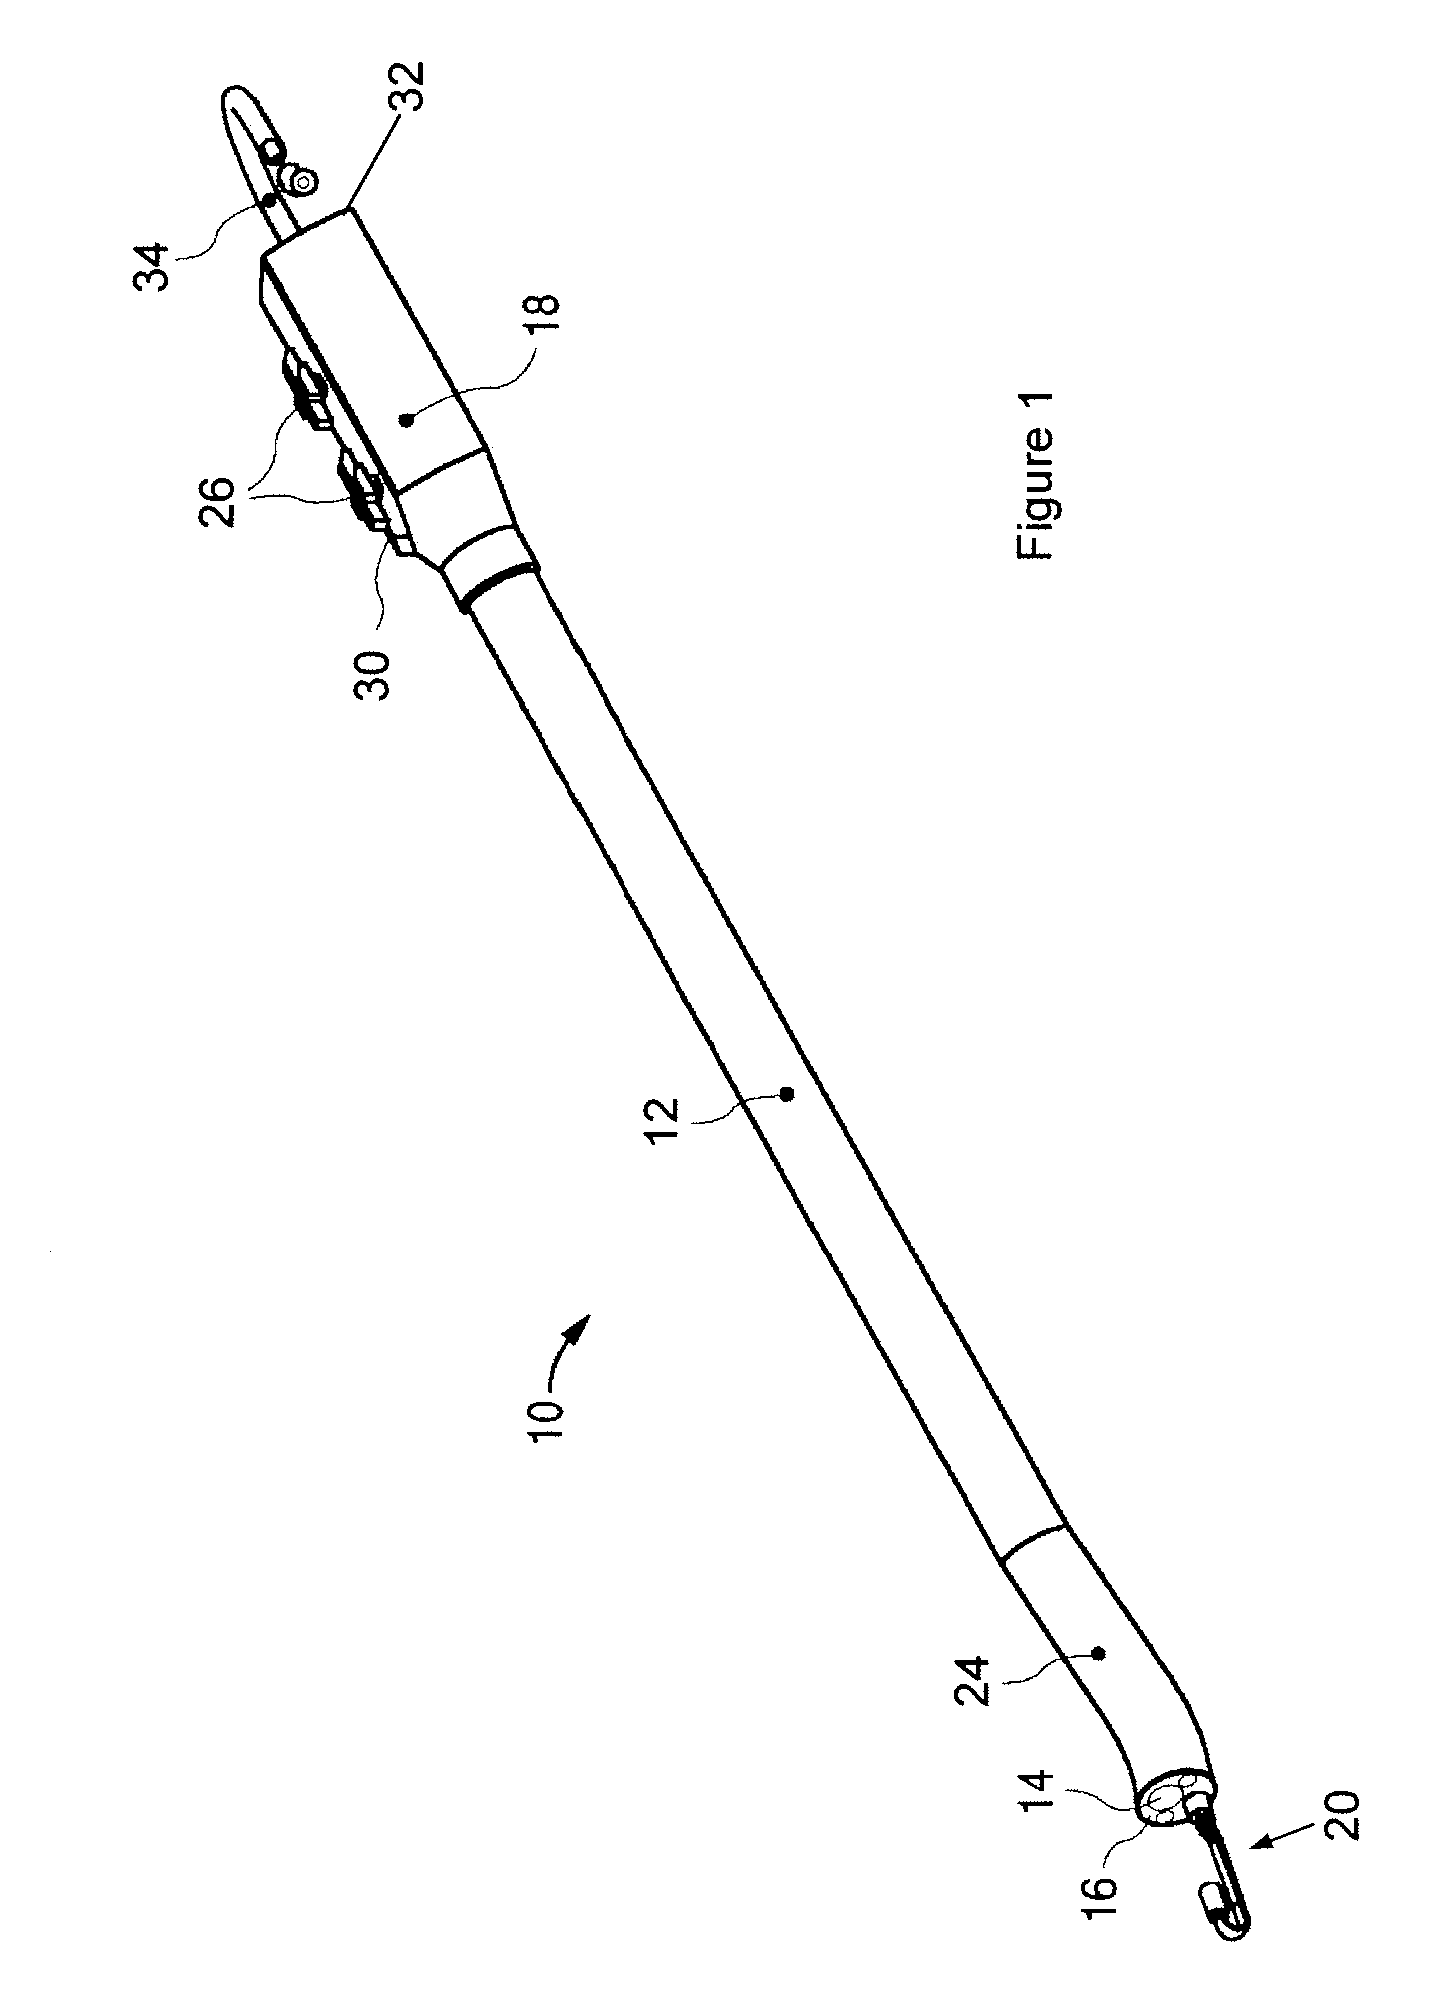 Endoscope assembly and method of viewing an area inside a cavity